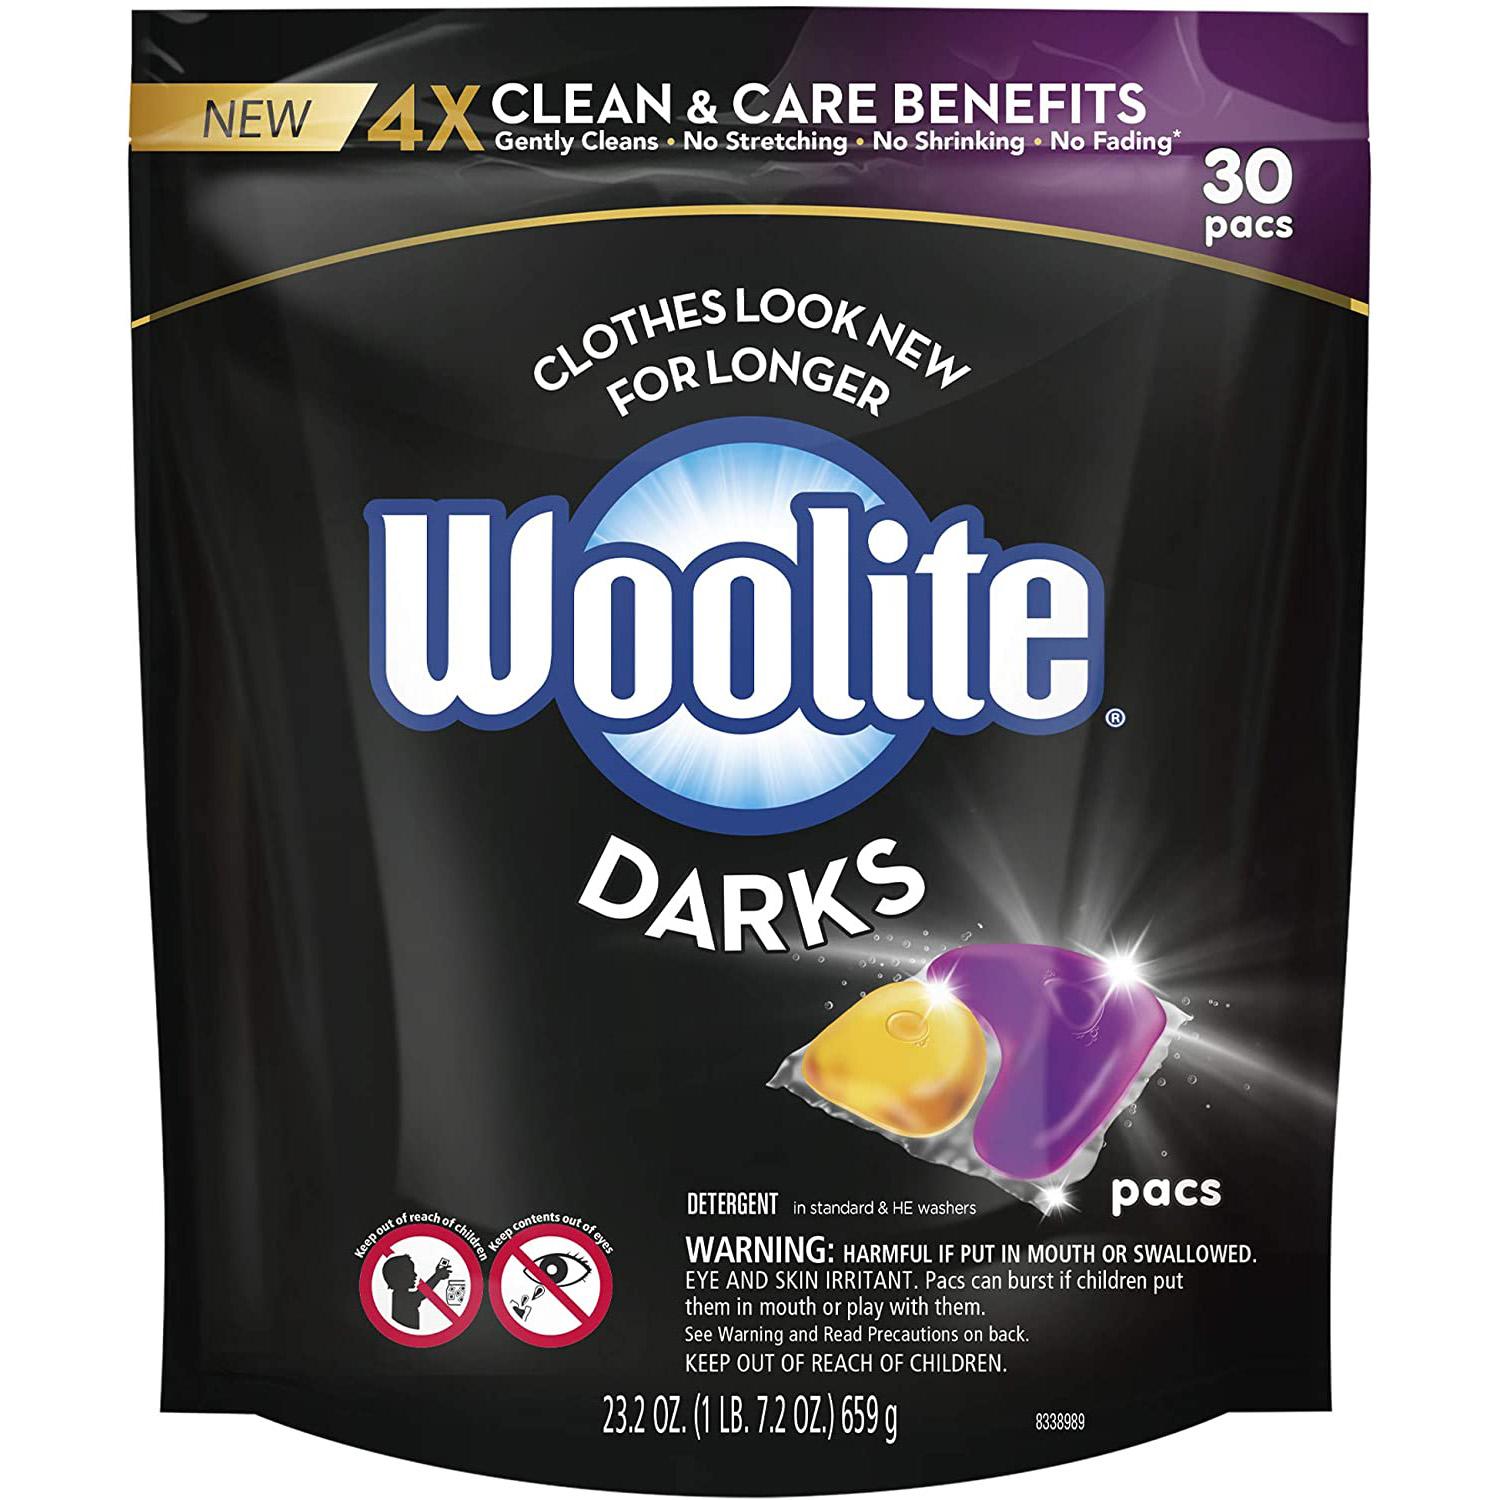 30 Woolite Darks Pacs Laundry Detergent for $8.38 Shipped